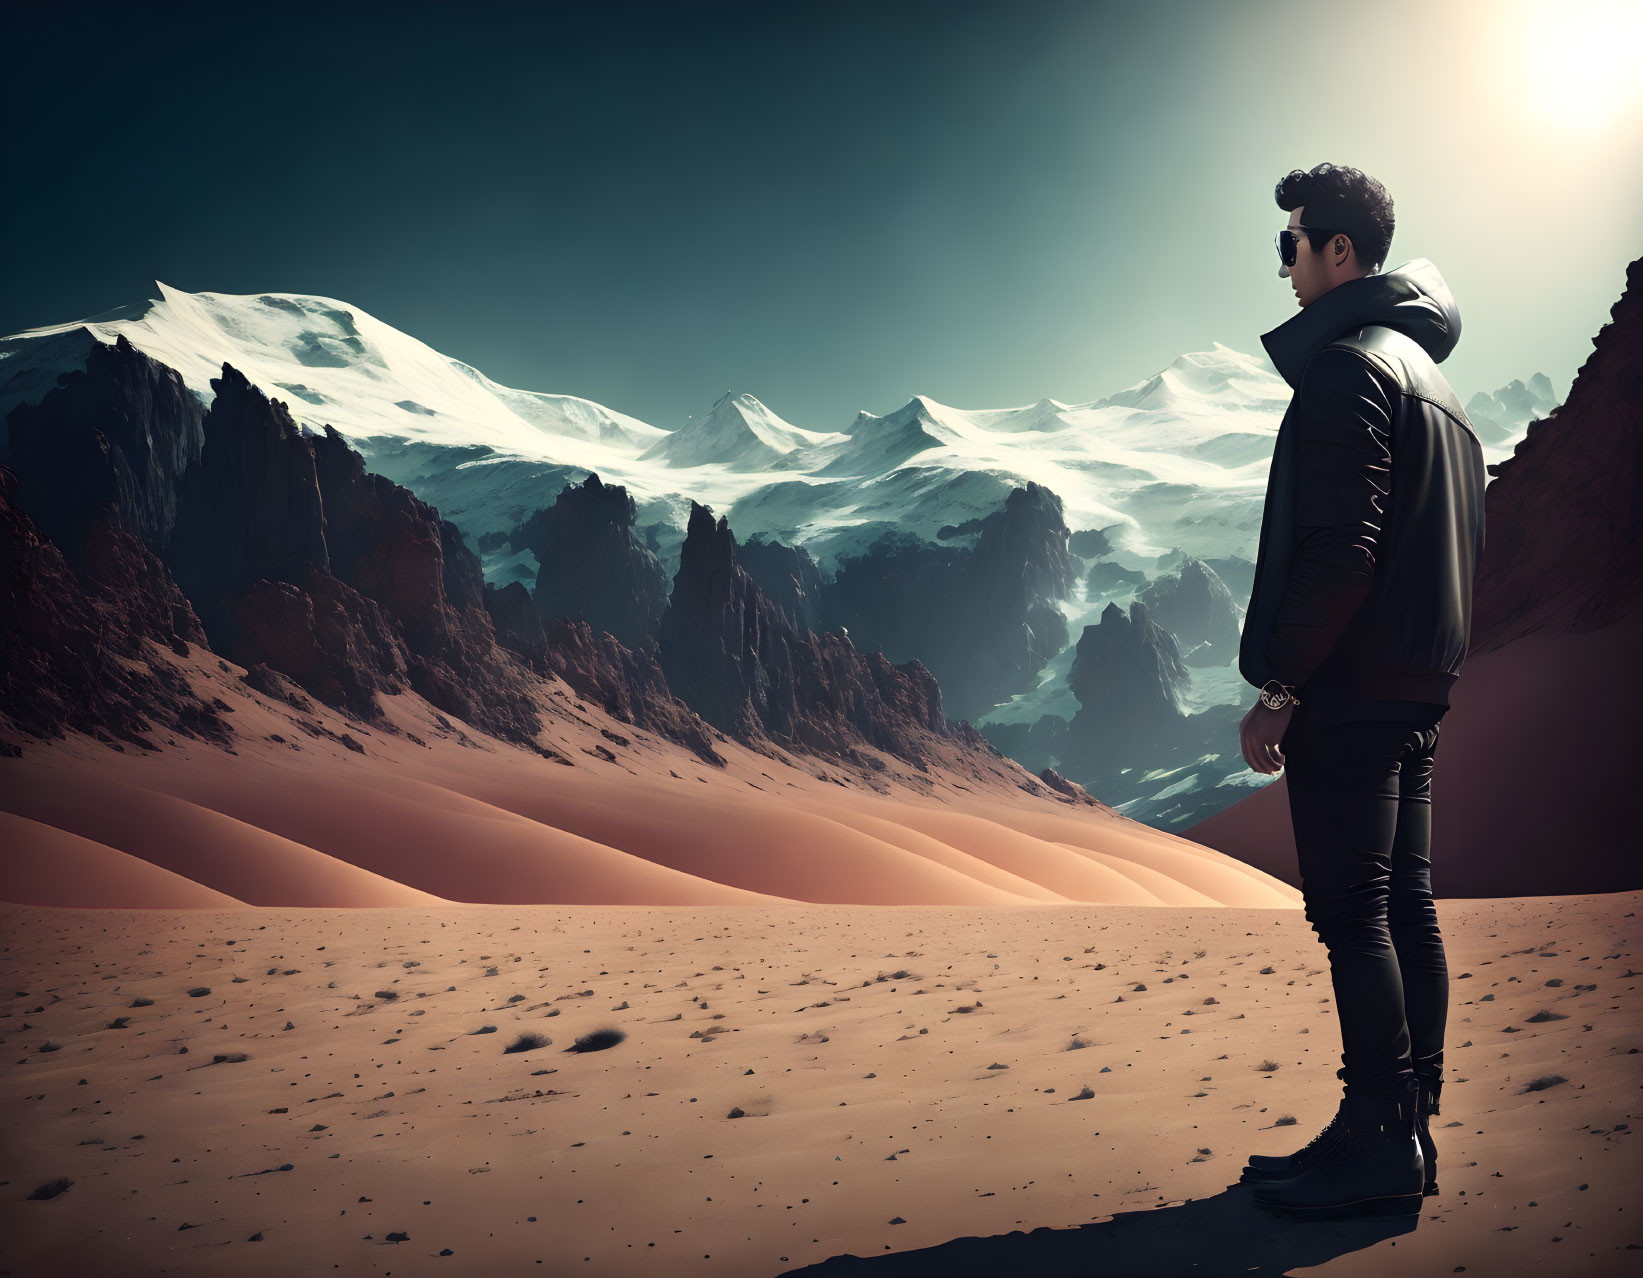 Person in Dark Clothing Gazes at Towering Mountains on Sandy Terrain